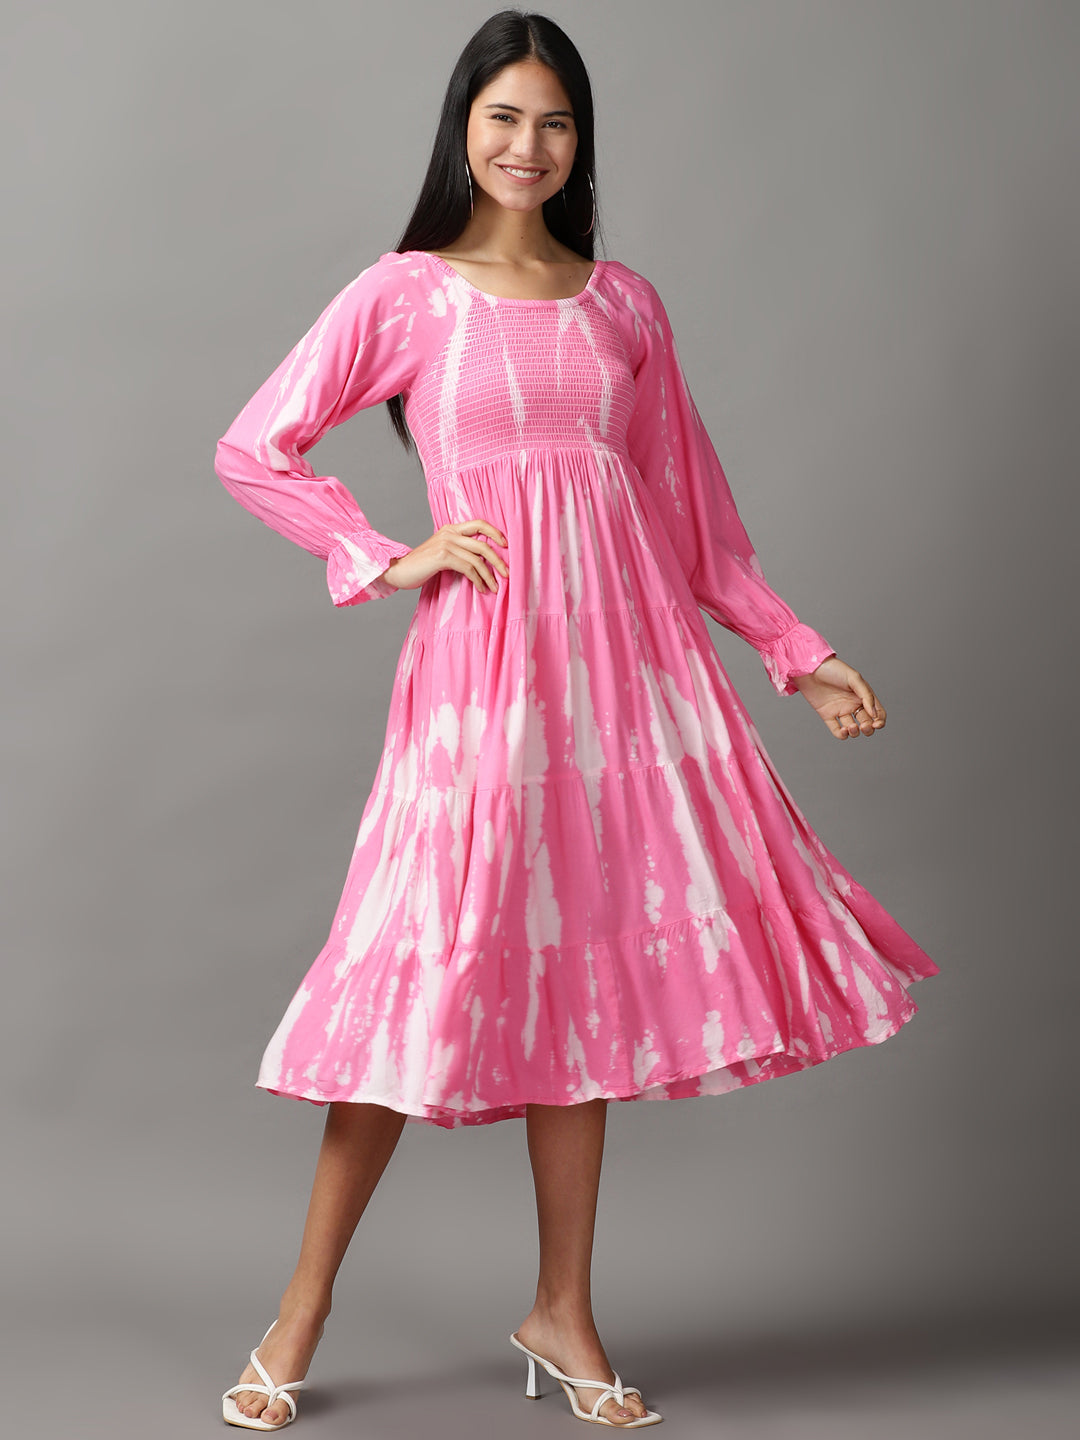 Women's Pink Tie Dye Fit and Flare Dress